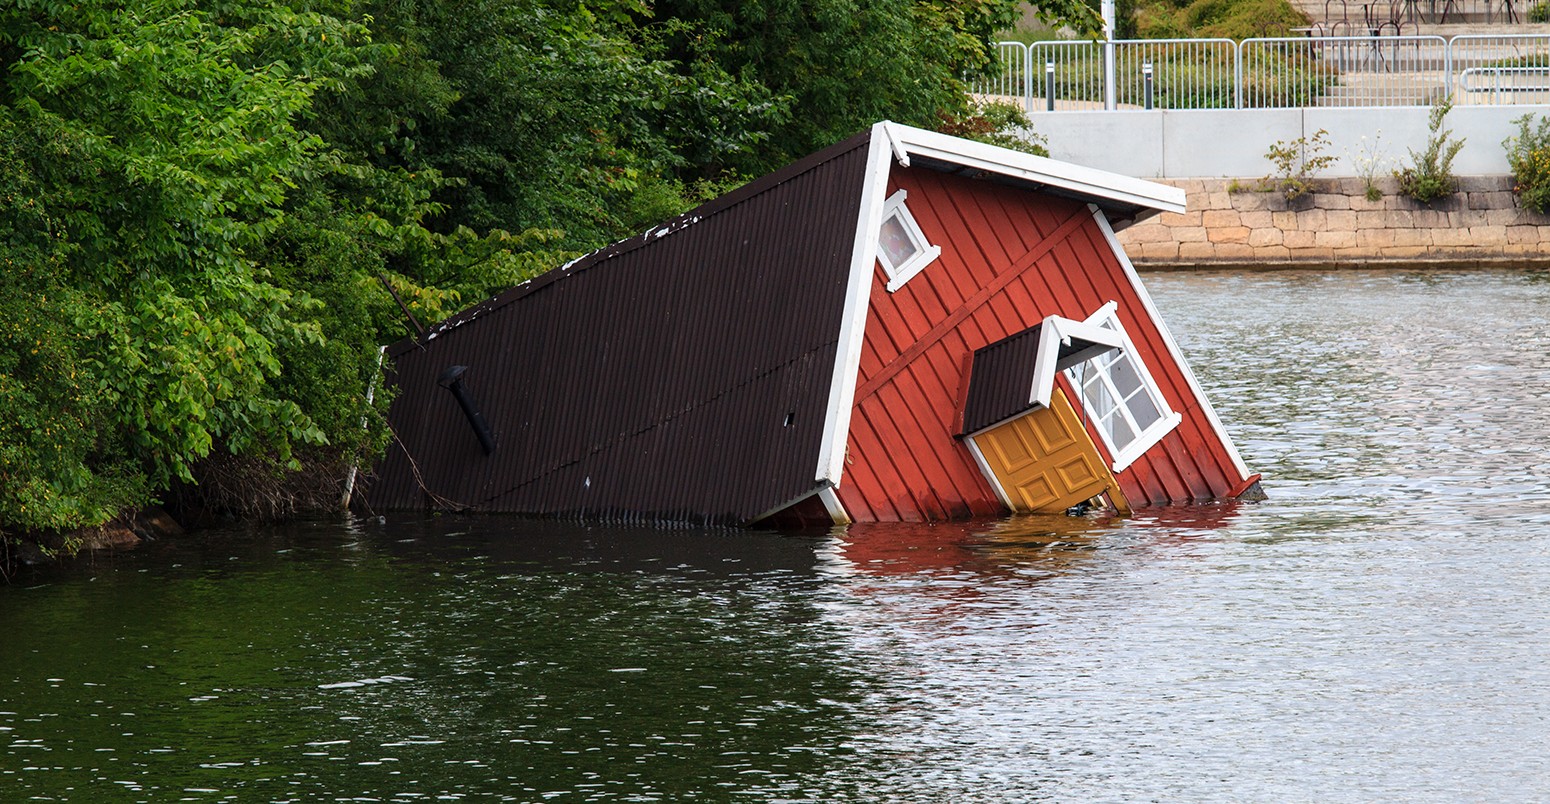 A sunken house in a river of Malmo, Sweden